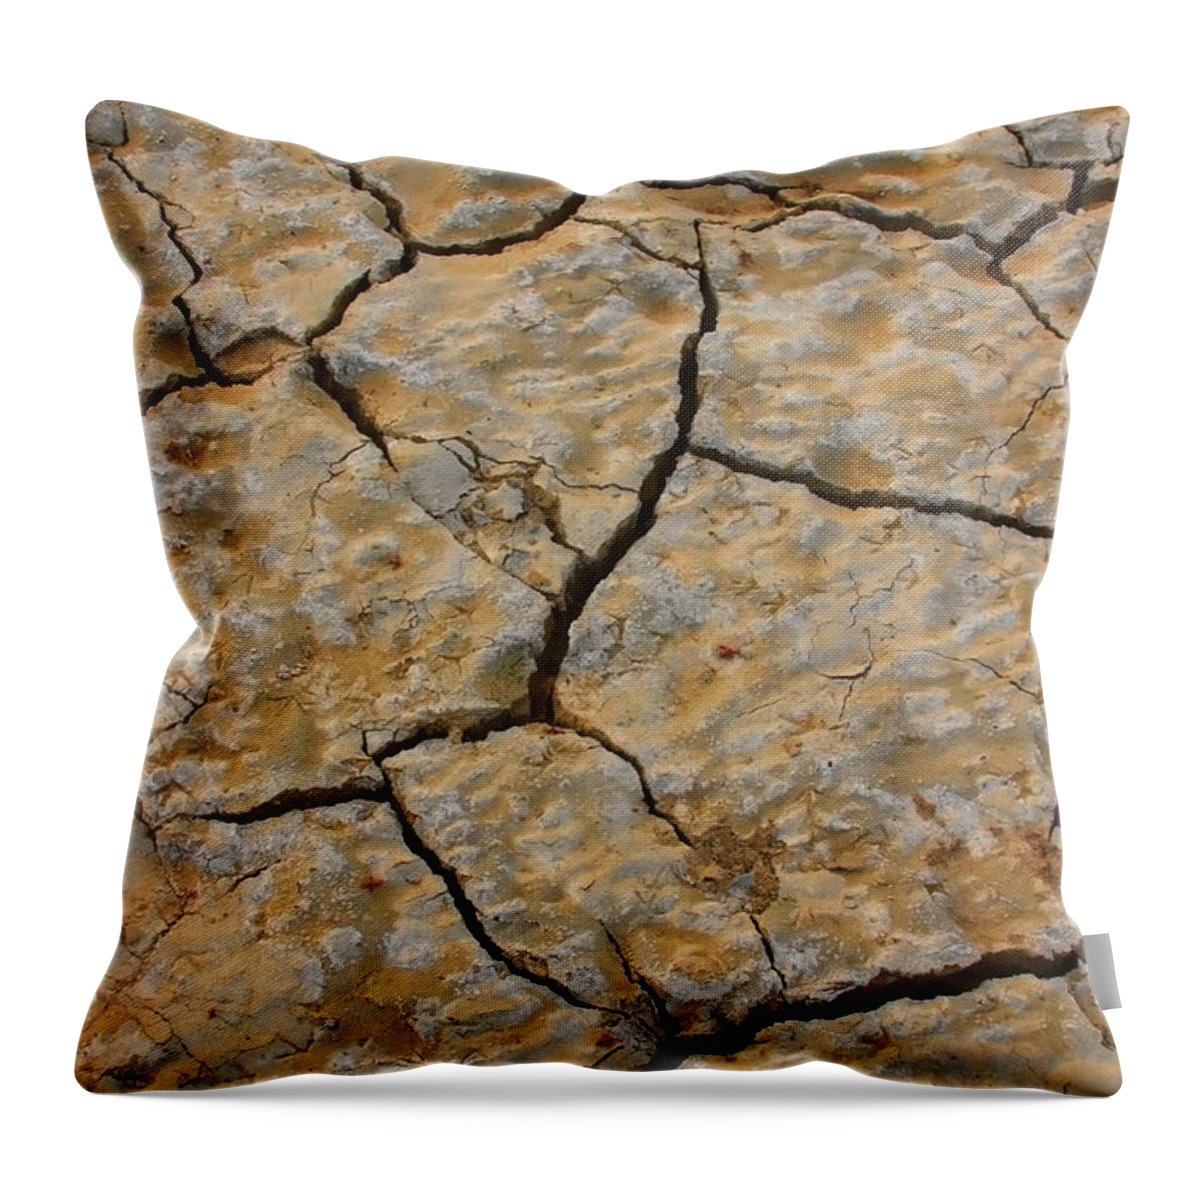 Cracks Throw Pillow featuring the photograph Dry Cracked Lake Bed by James BO Insogna